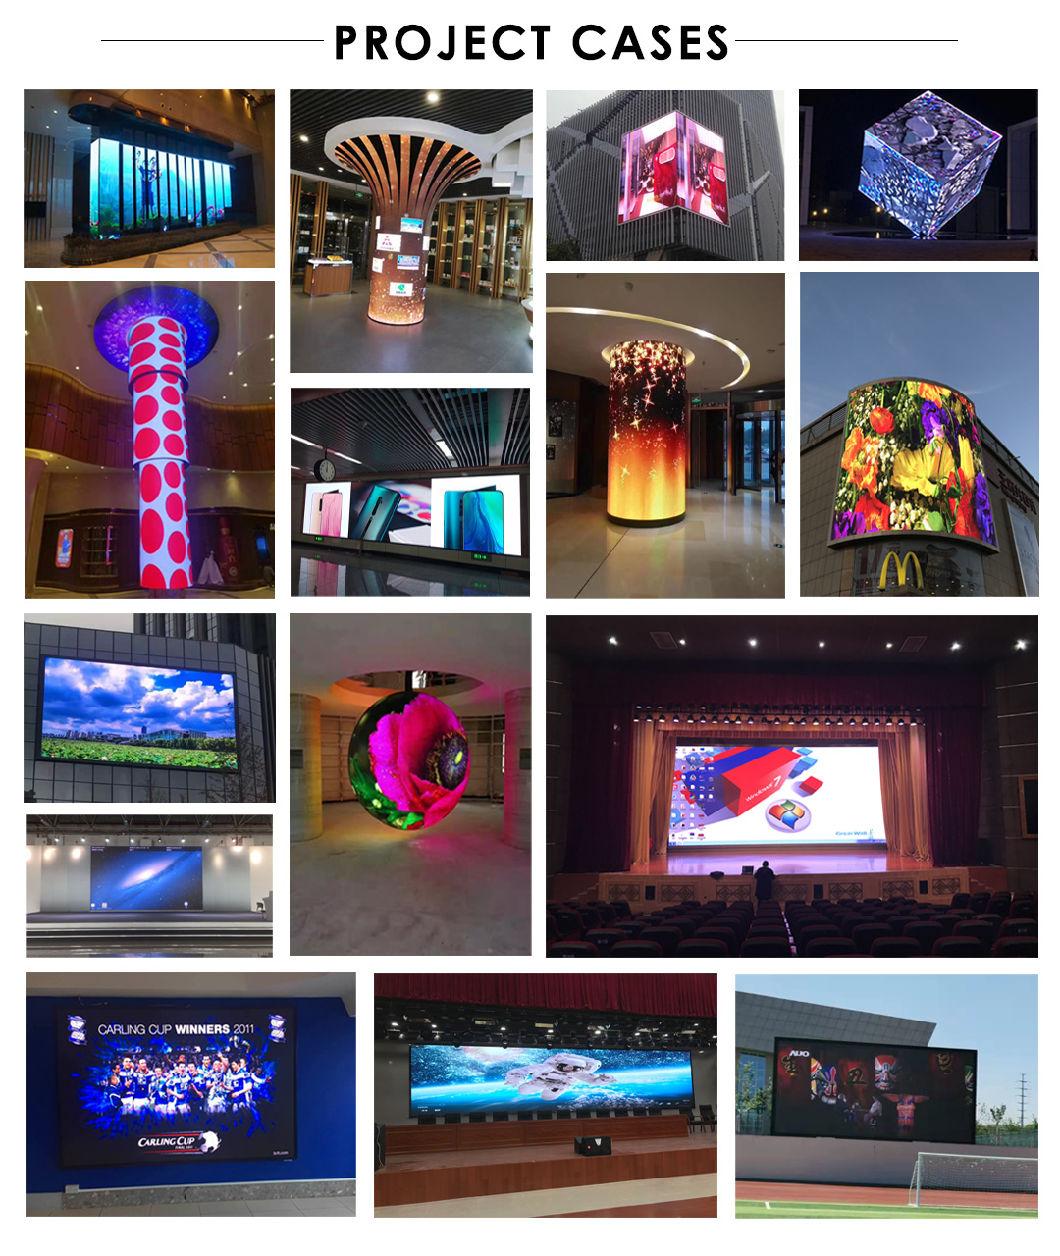 Full Color Outdoor Removable Cabinet LED Rental Display Screen P3.91